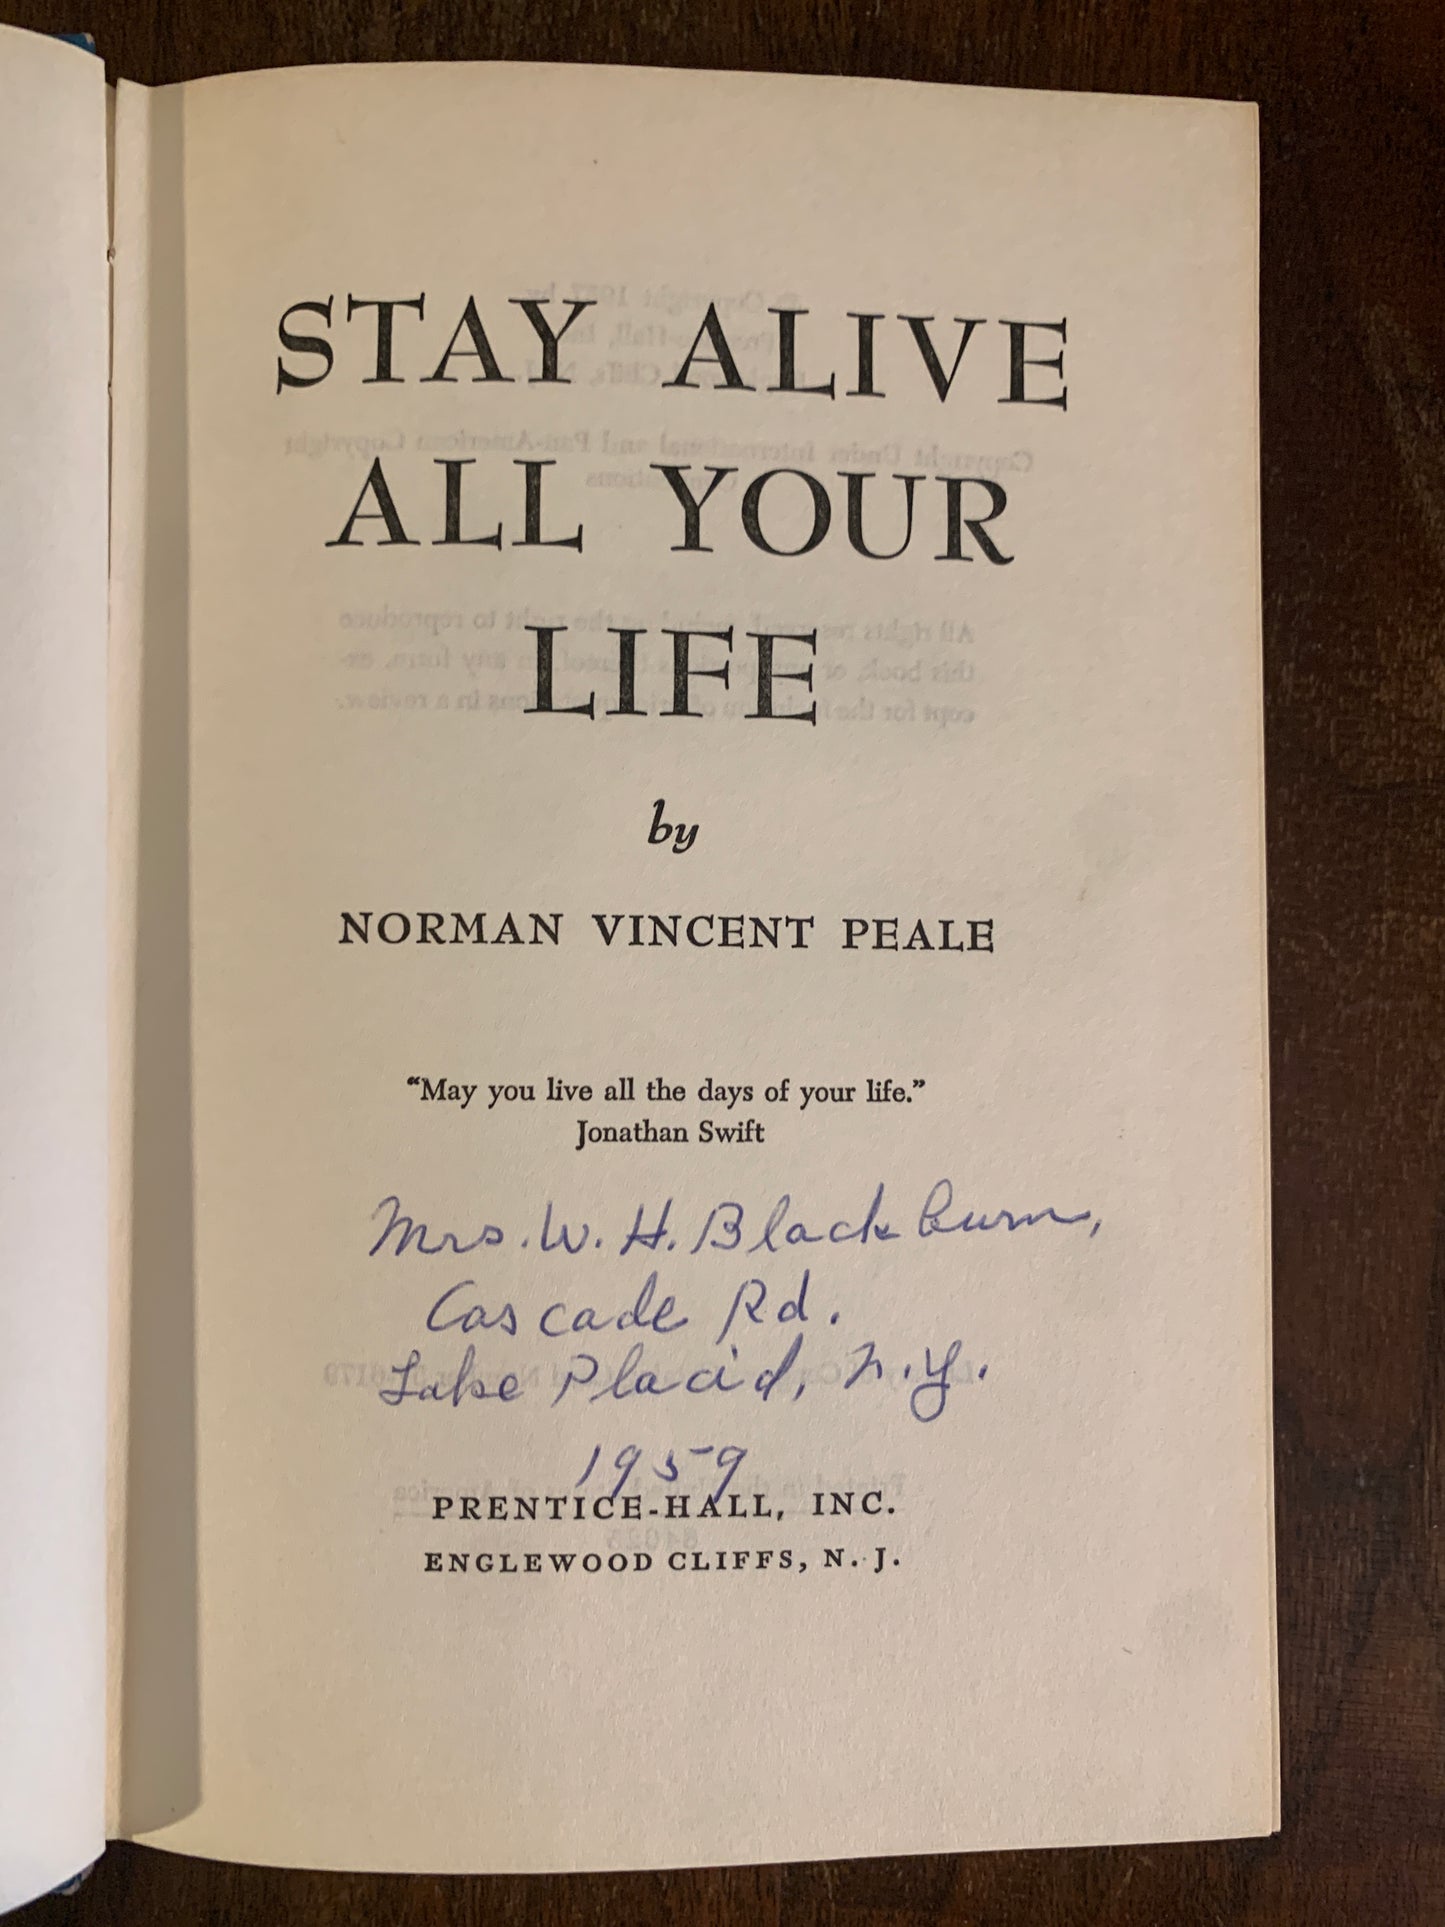 Stay Alive All Your Life by Norman Vincent Peale 1957